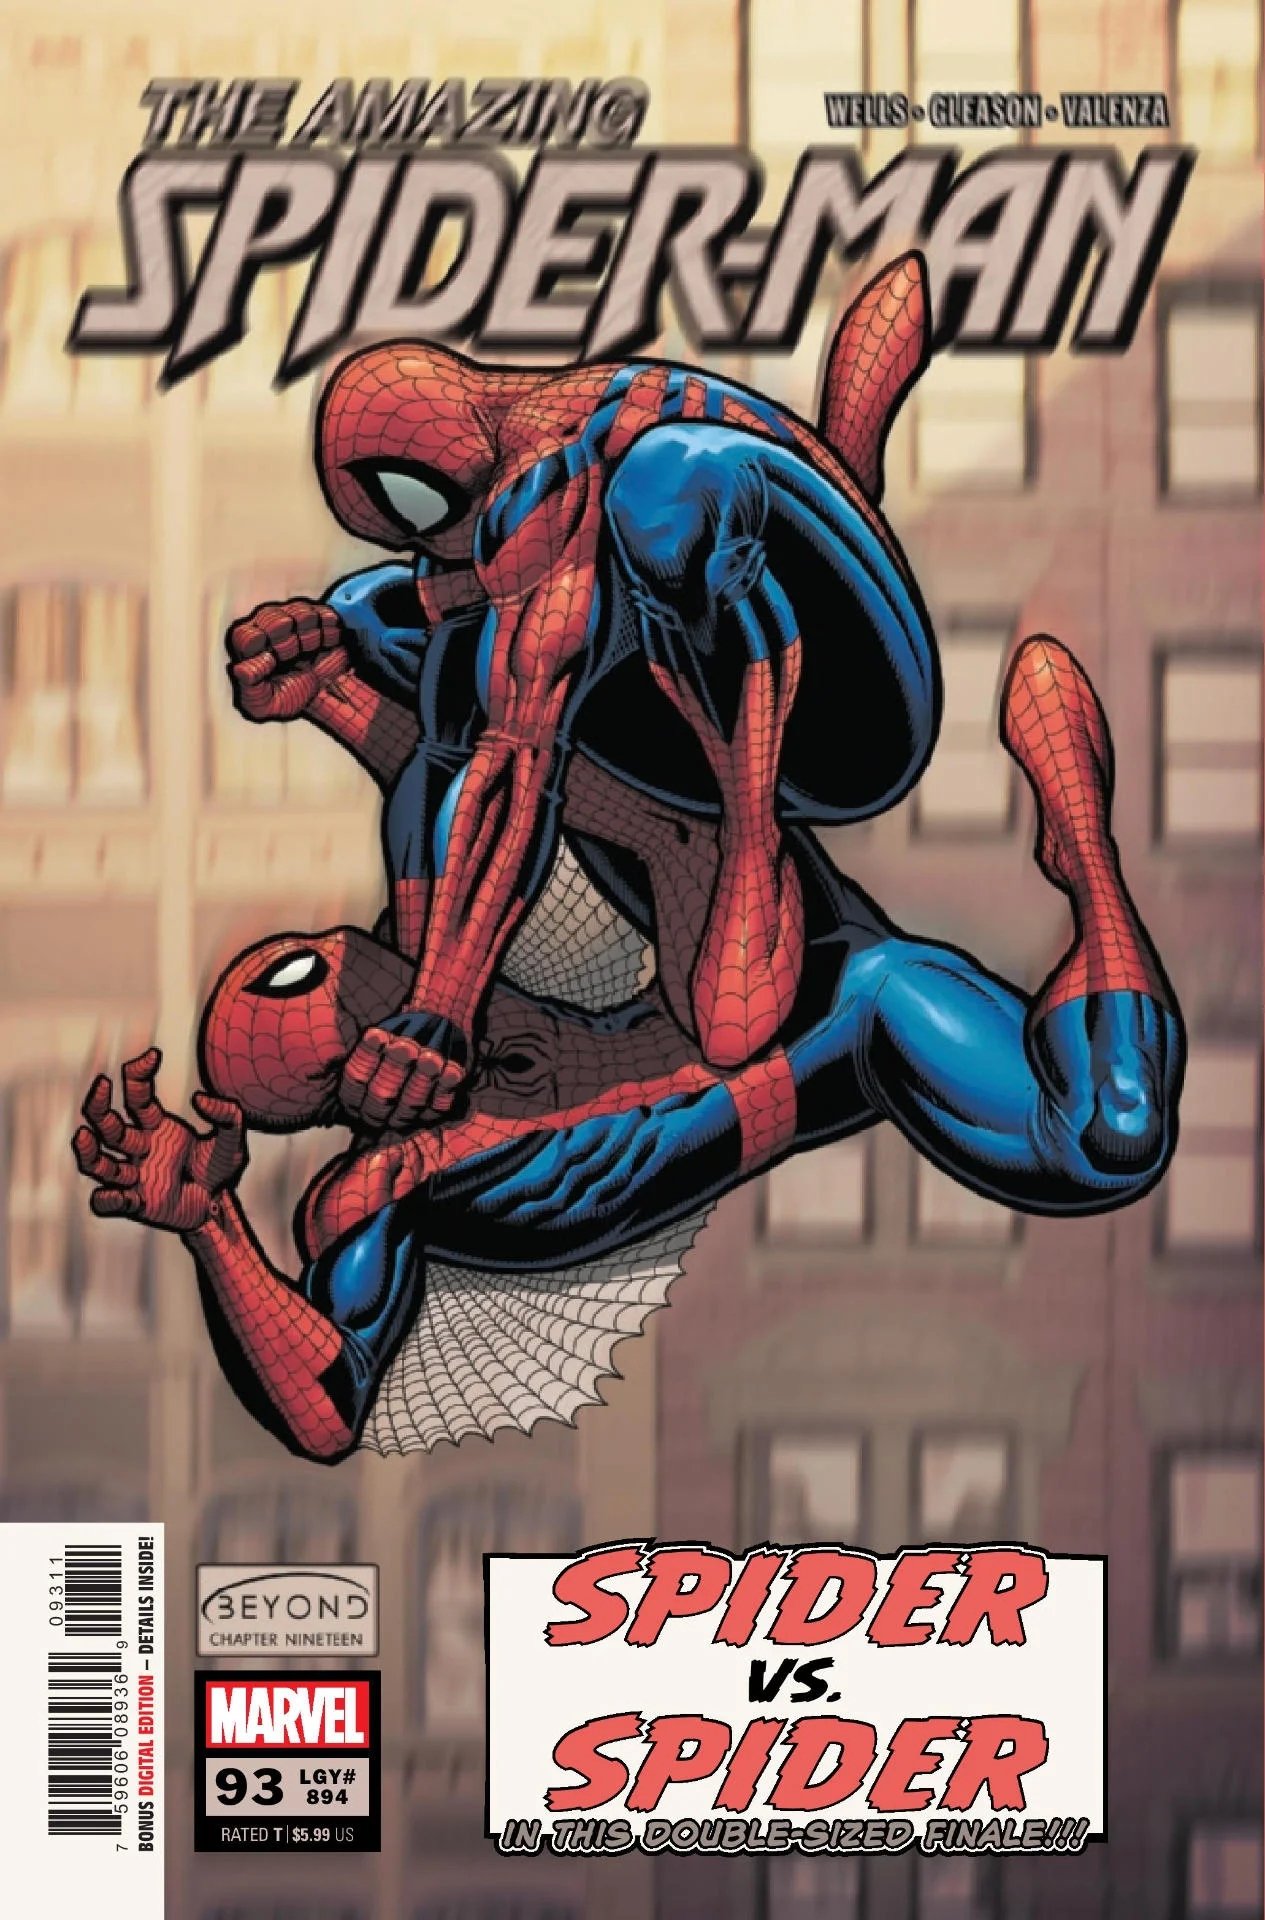 Peter Parker and Ben Reilly will fight for the identity of Spider-Man